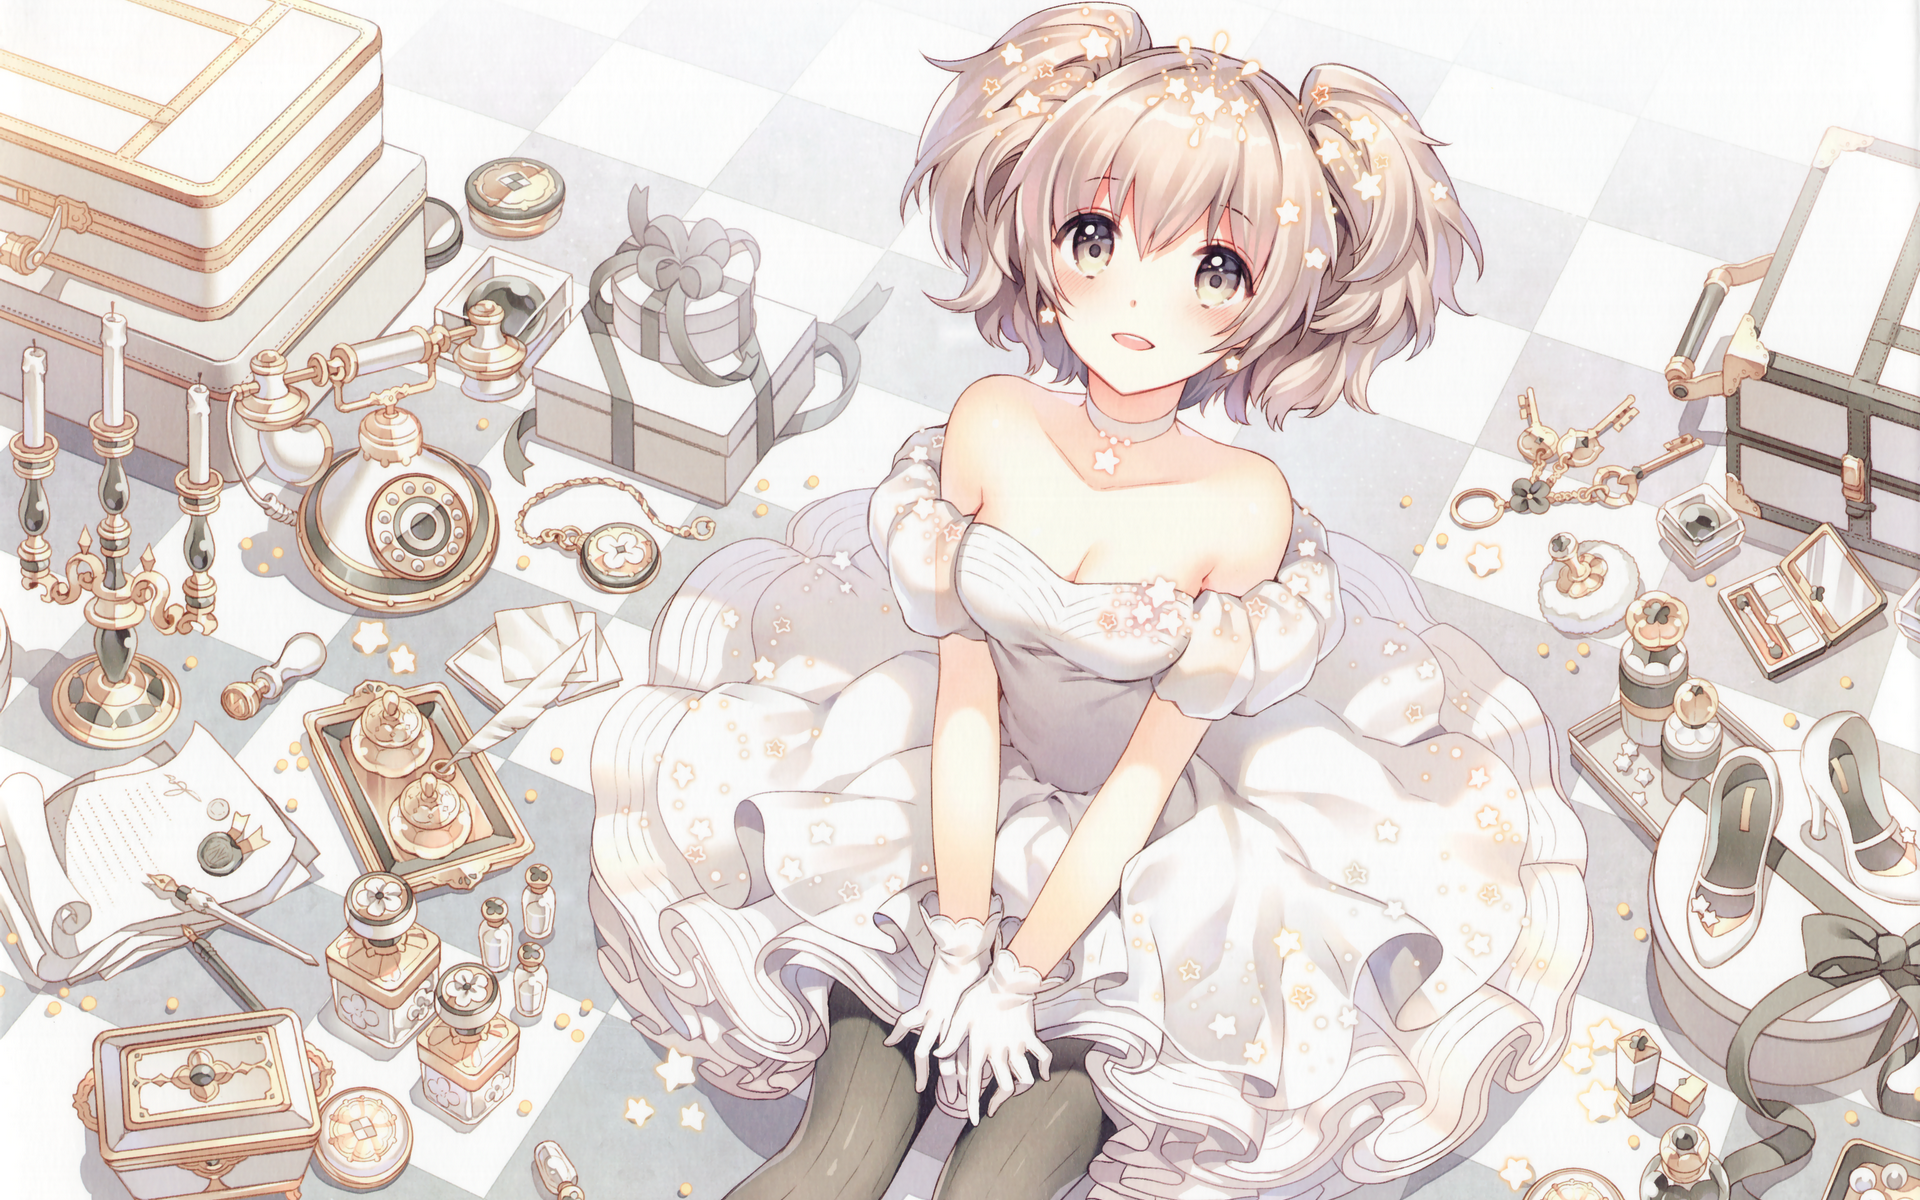 Nardack Dress Gloves Jewelry Stars Pearls Shoes Phone Anime Anime Girls Original Characters Twintail 1920x1200